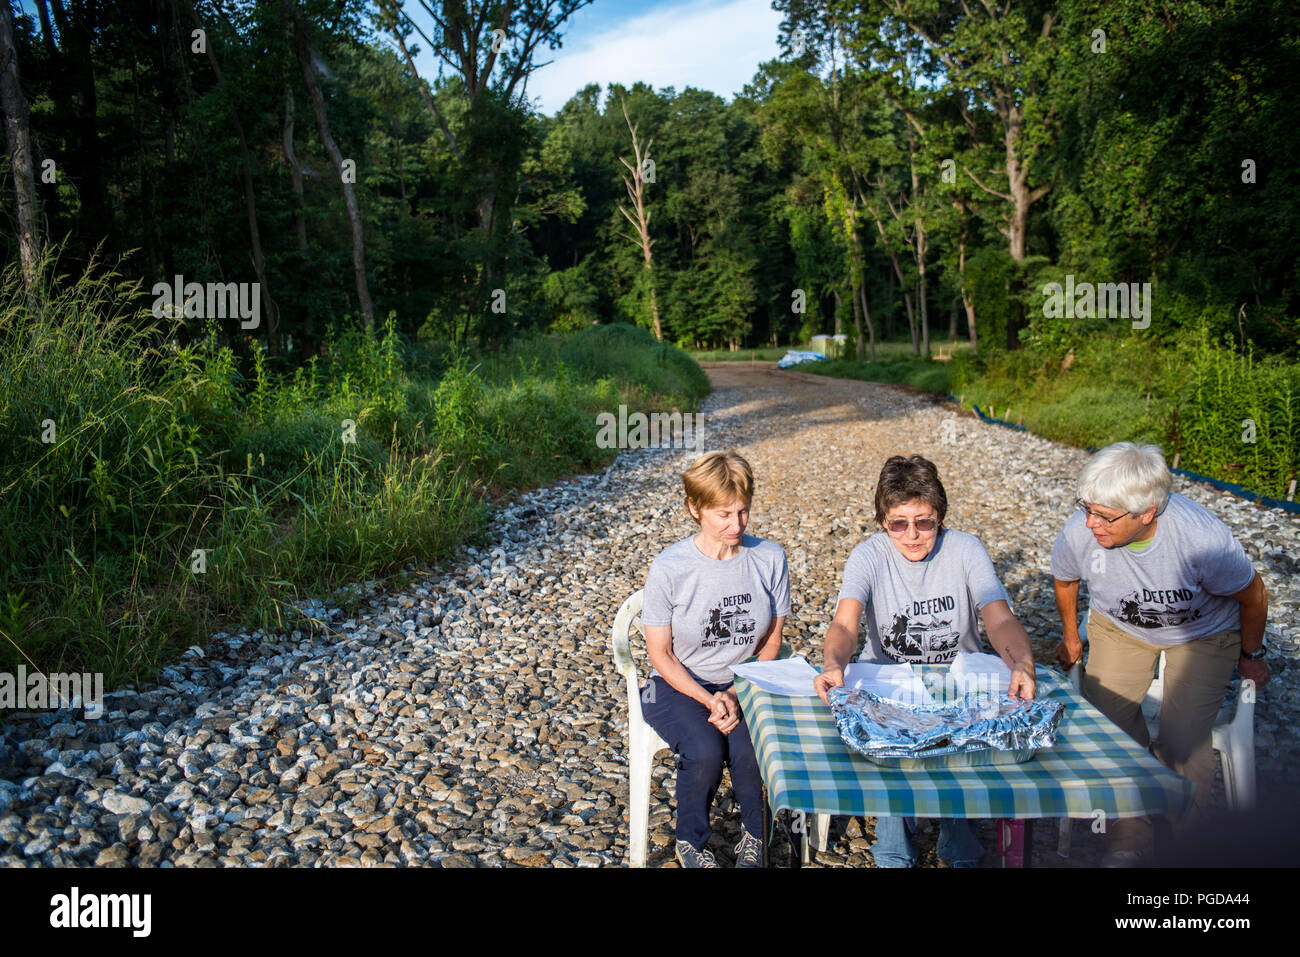 Pennsylvania, USA. 25 August 2018.  Ann Dixon, Abbie Wysor and Barbara Montabano set up a bake sale close to Sunoco's construction site. Residents held a bake sale at a pipeline construction site close to Glenwood Elemenary School in Middletown Township in protest of Sunoco's Mariner East Pipeline that threatens the safety of residents, students and daycare centers through a densley populated area. Three people were eventually arrested by state police for refusing to disperse following a lawful order. August 25 2018. Photo Credit: Chris Baker Evens. Credit: Christopher Evens/Alamy Stock Photo